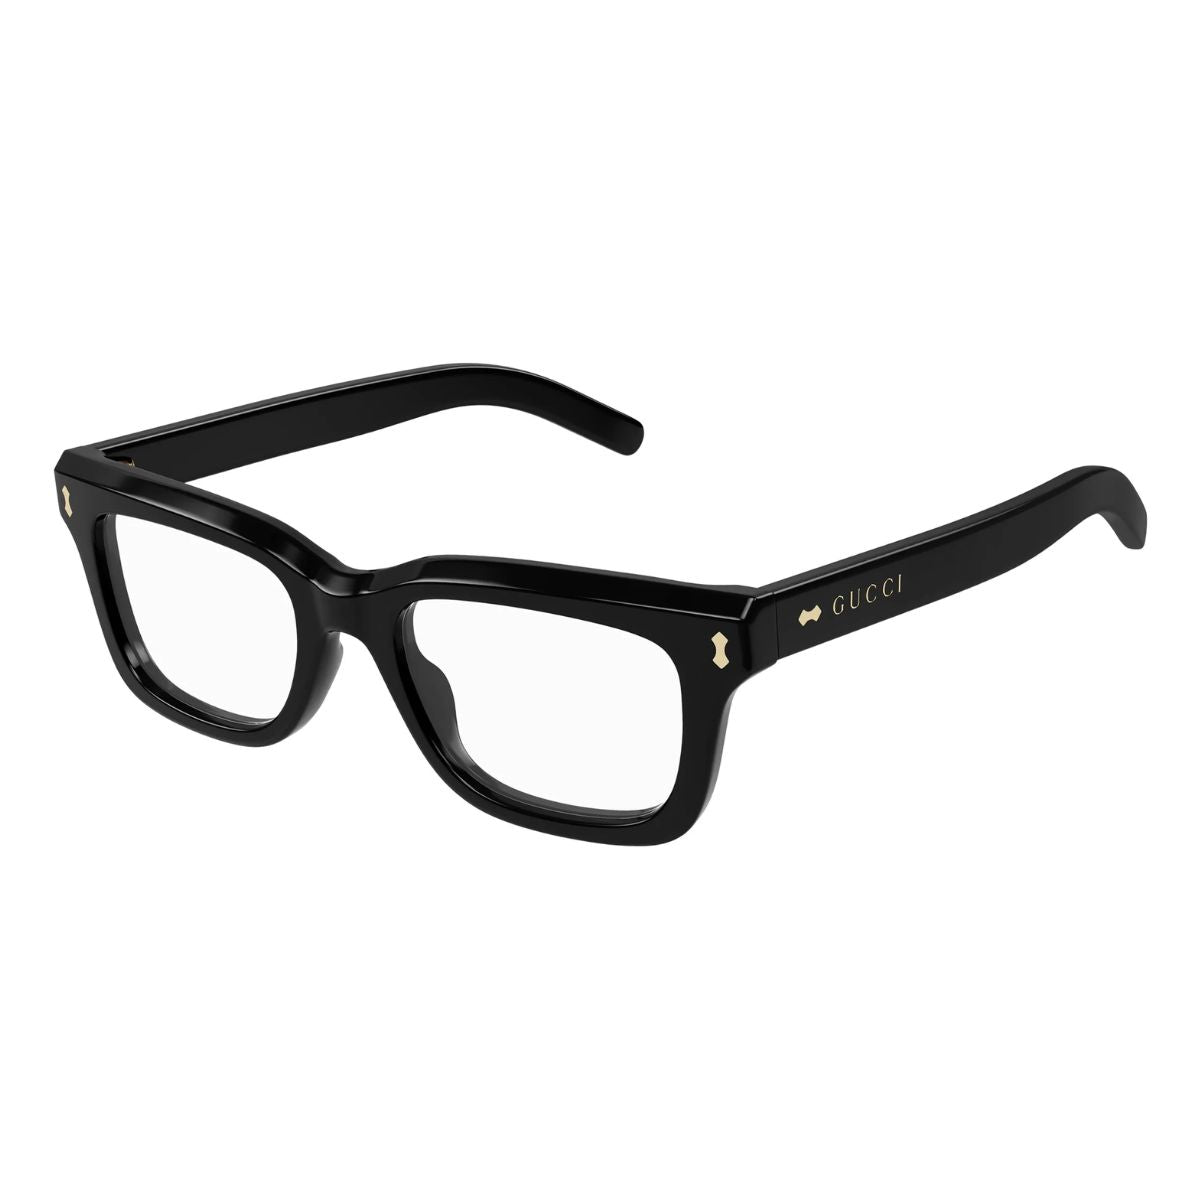  "Gucci Men's Spectacles 1522O 001 - Premium quality frames offering comfort and durability for everyday wear."